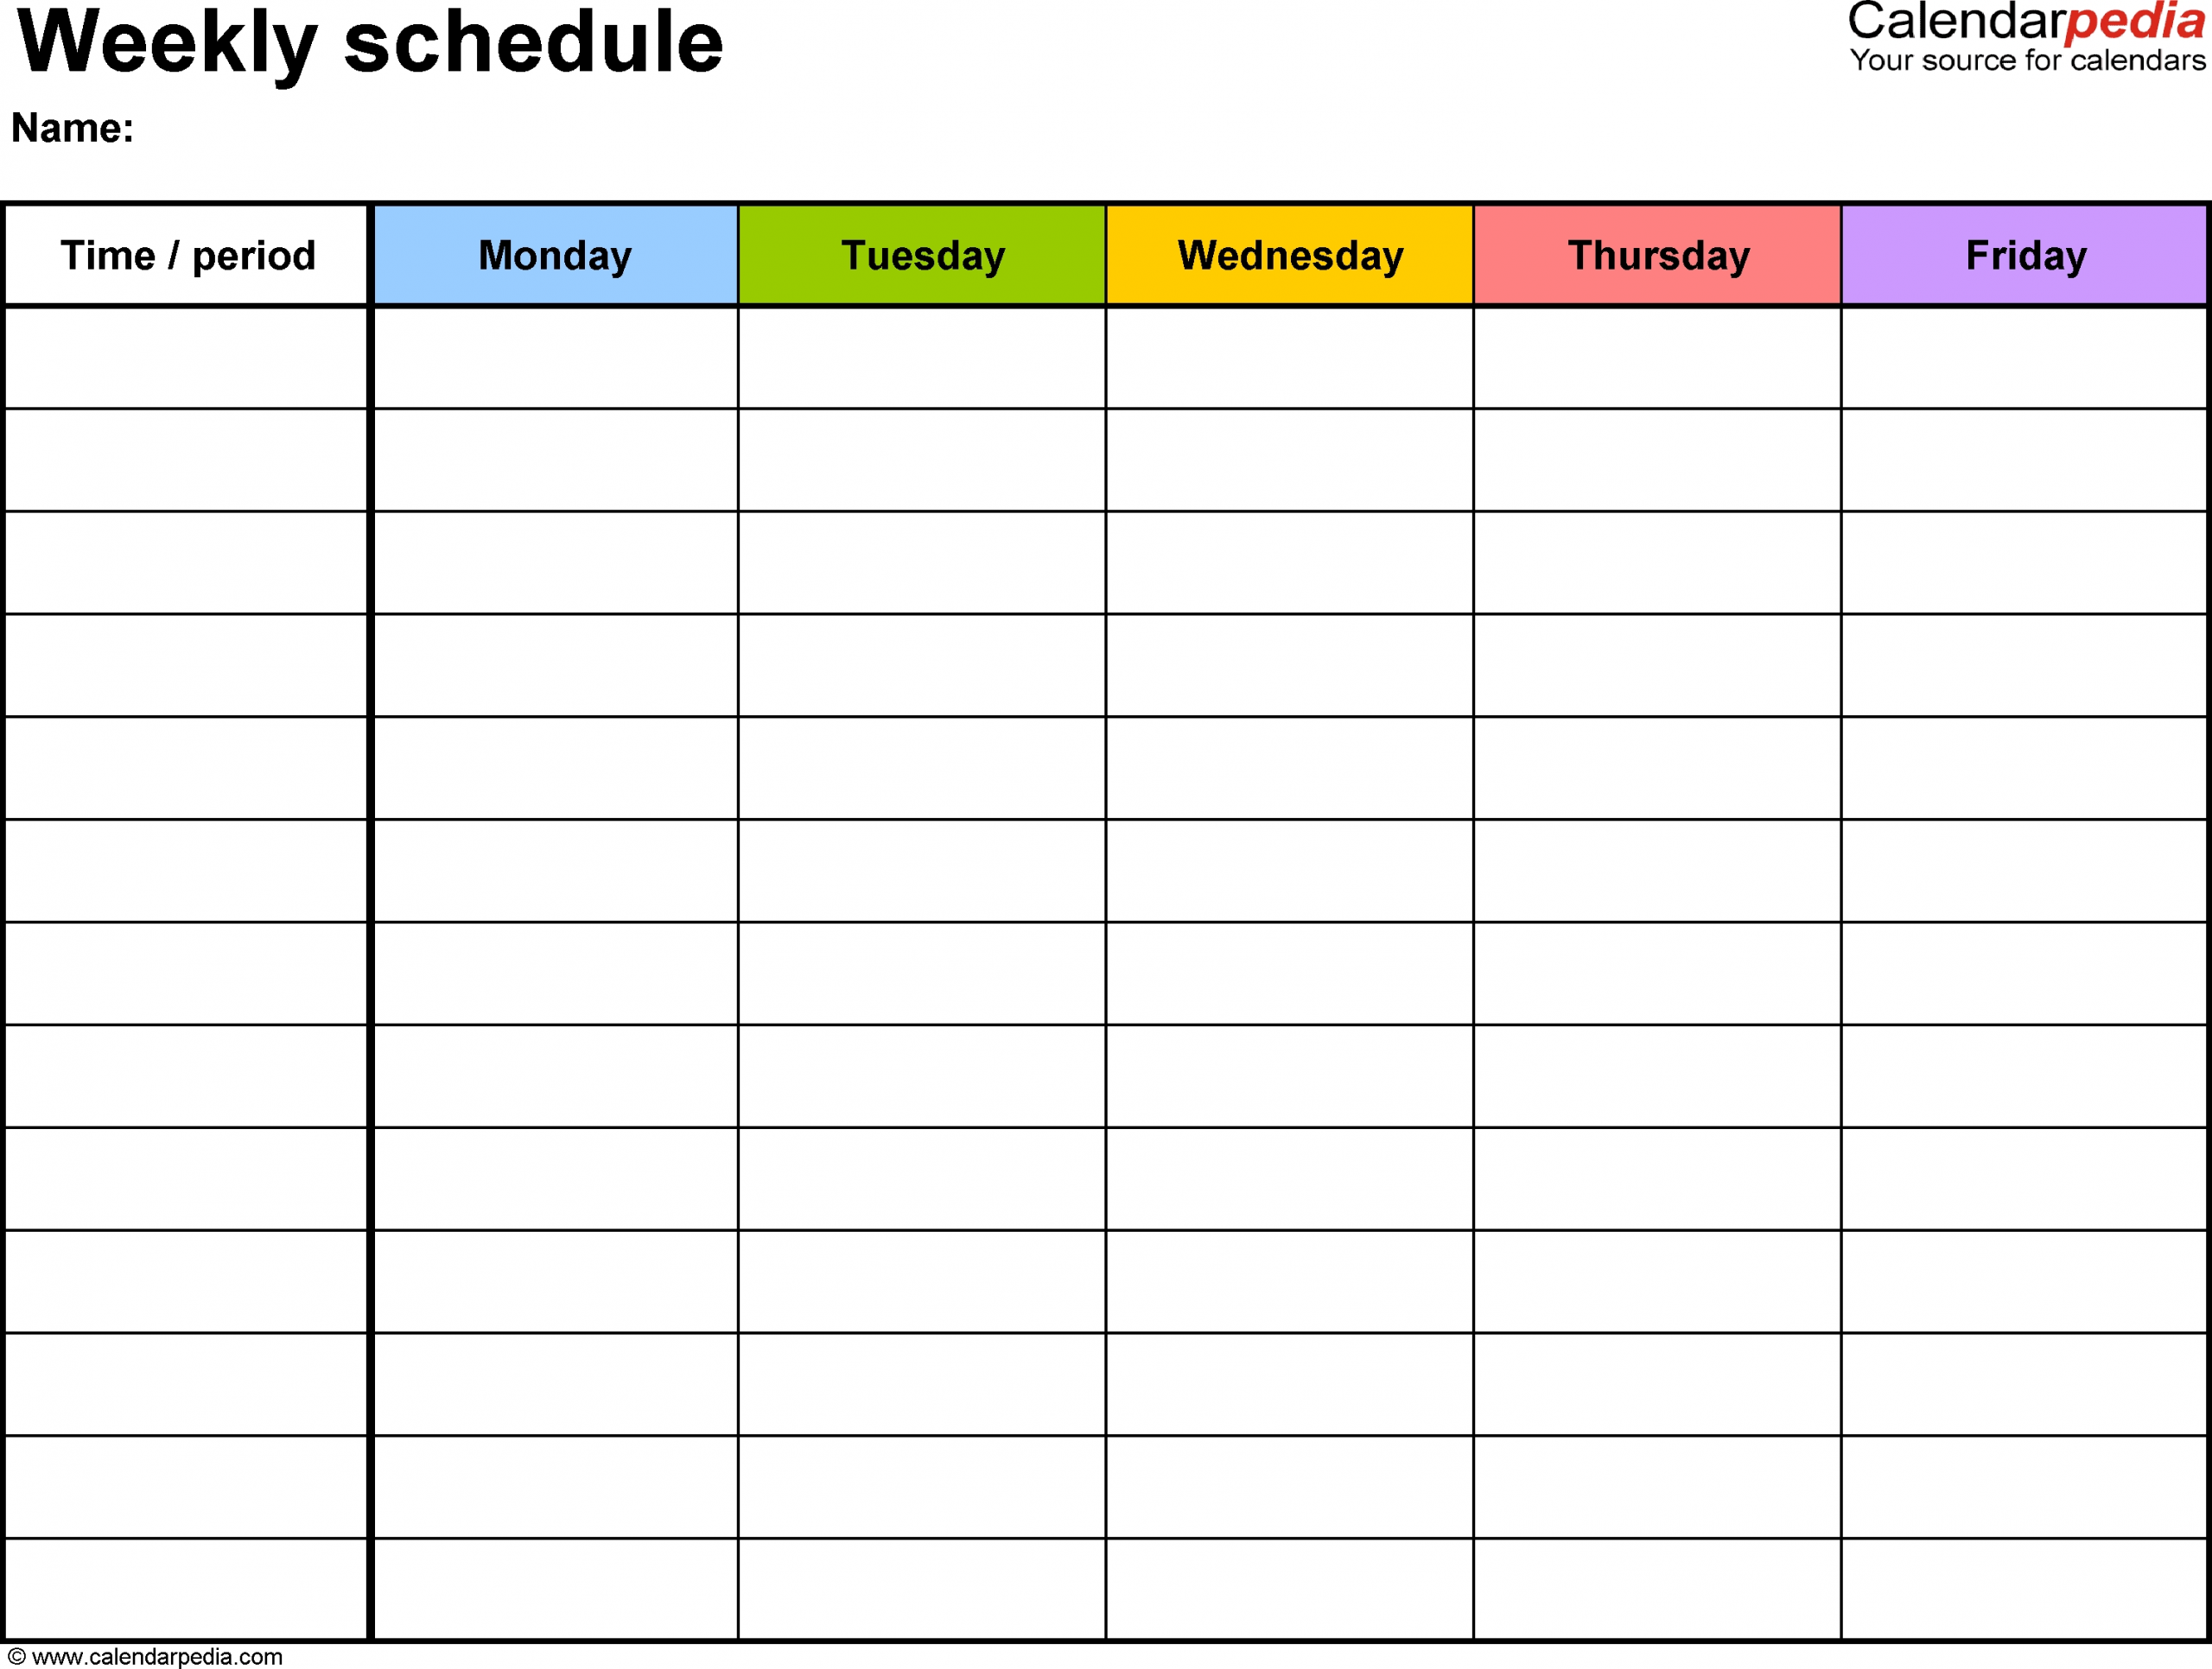 Free Weekly Schedule Templates For Pdf - 18 Templates 7 Day Calendar Template Free